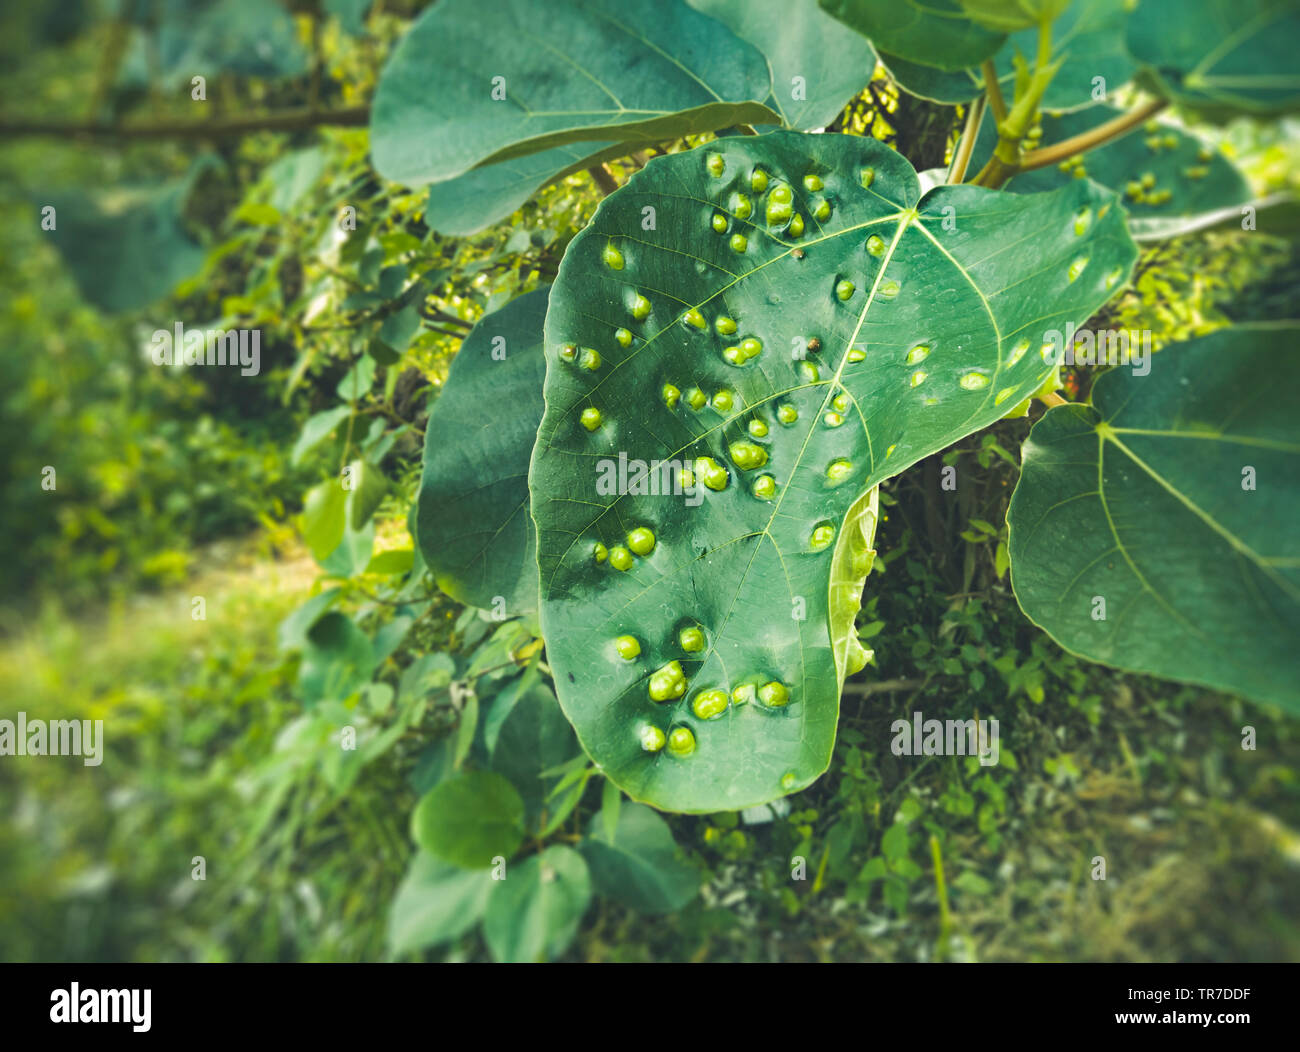 Outdoor close-up of a common fungal disease (leaf galls) of plants and trees, caused by the fungus called Taphrina Deformans. Stock Photo